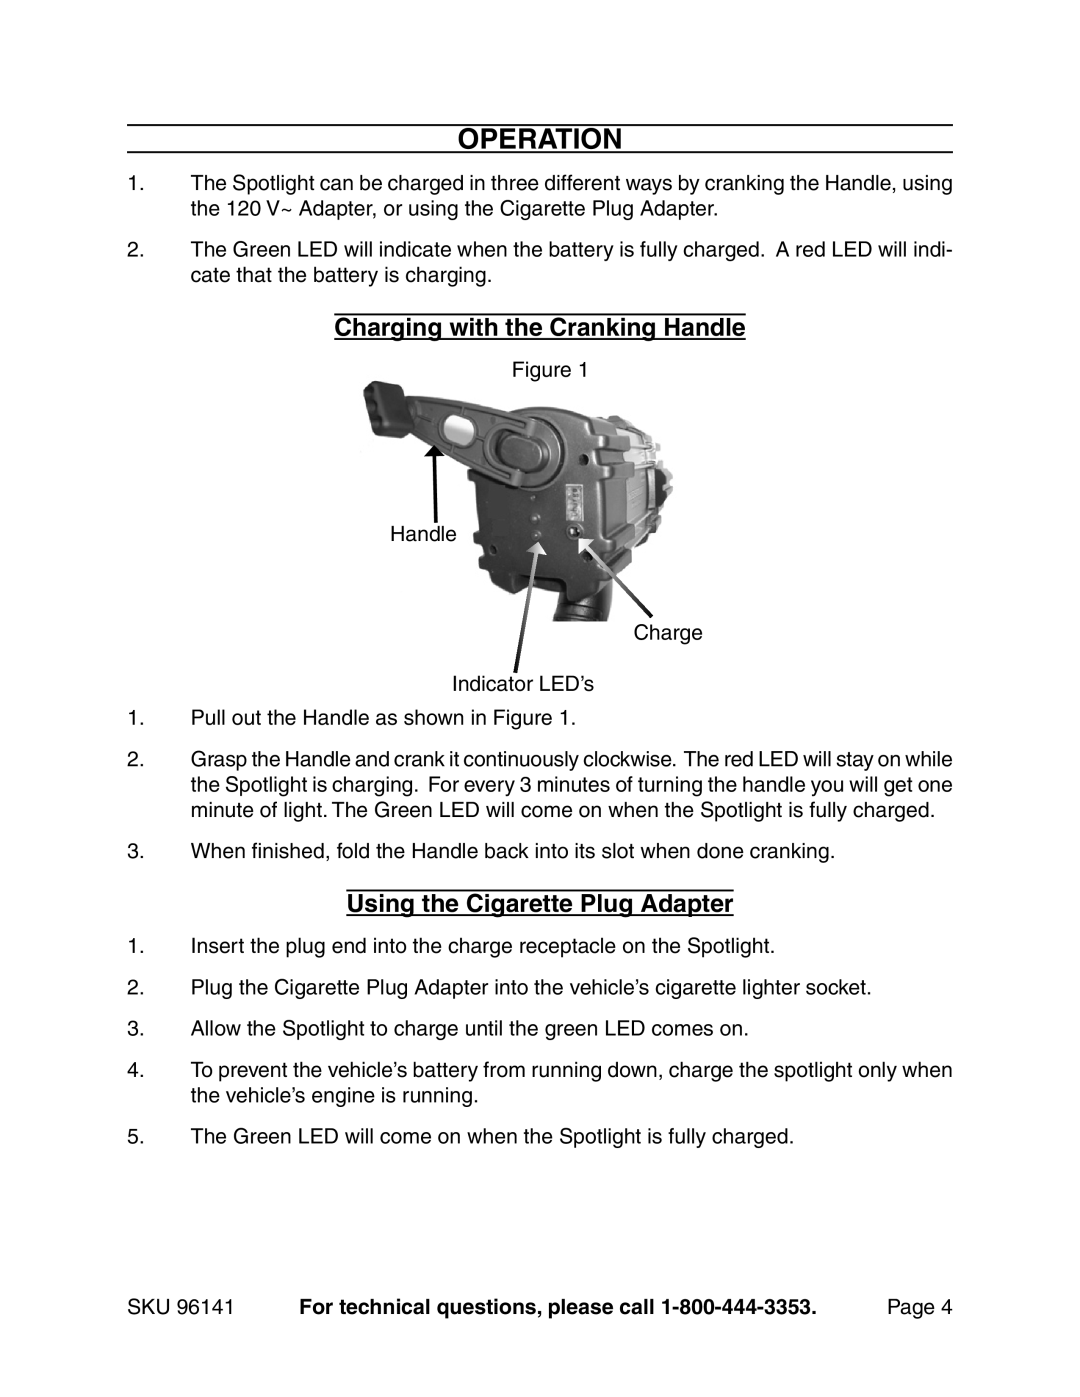 Harbor Freight Tools 96141 manual Operation, Charging with the Cranking Handle, Using the Cigarette Plug Adapter 